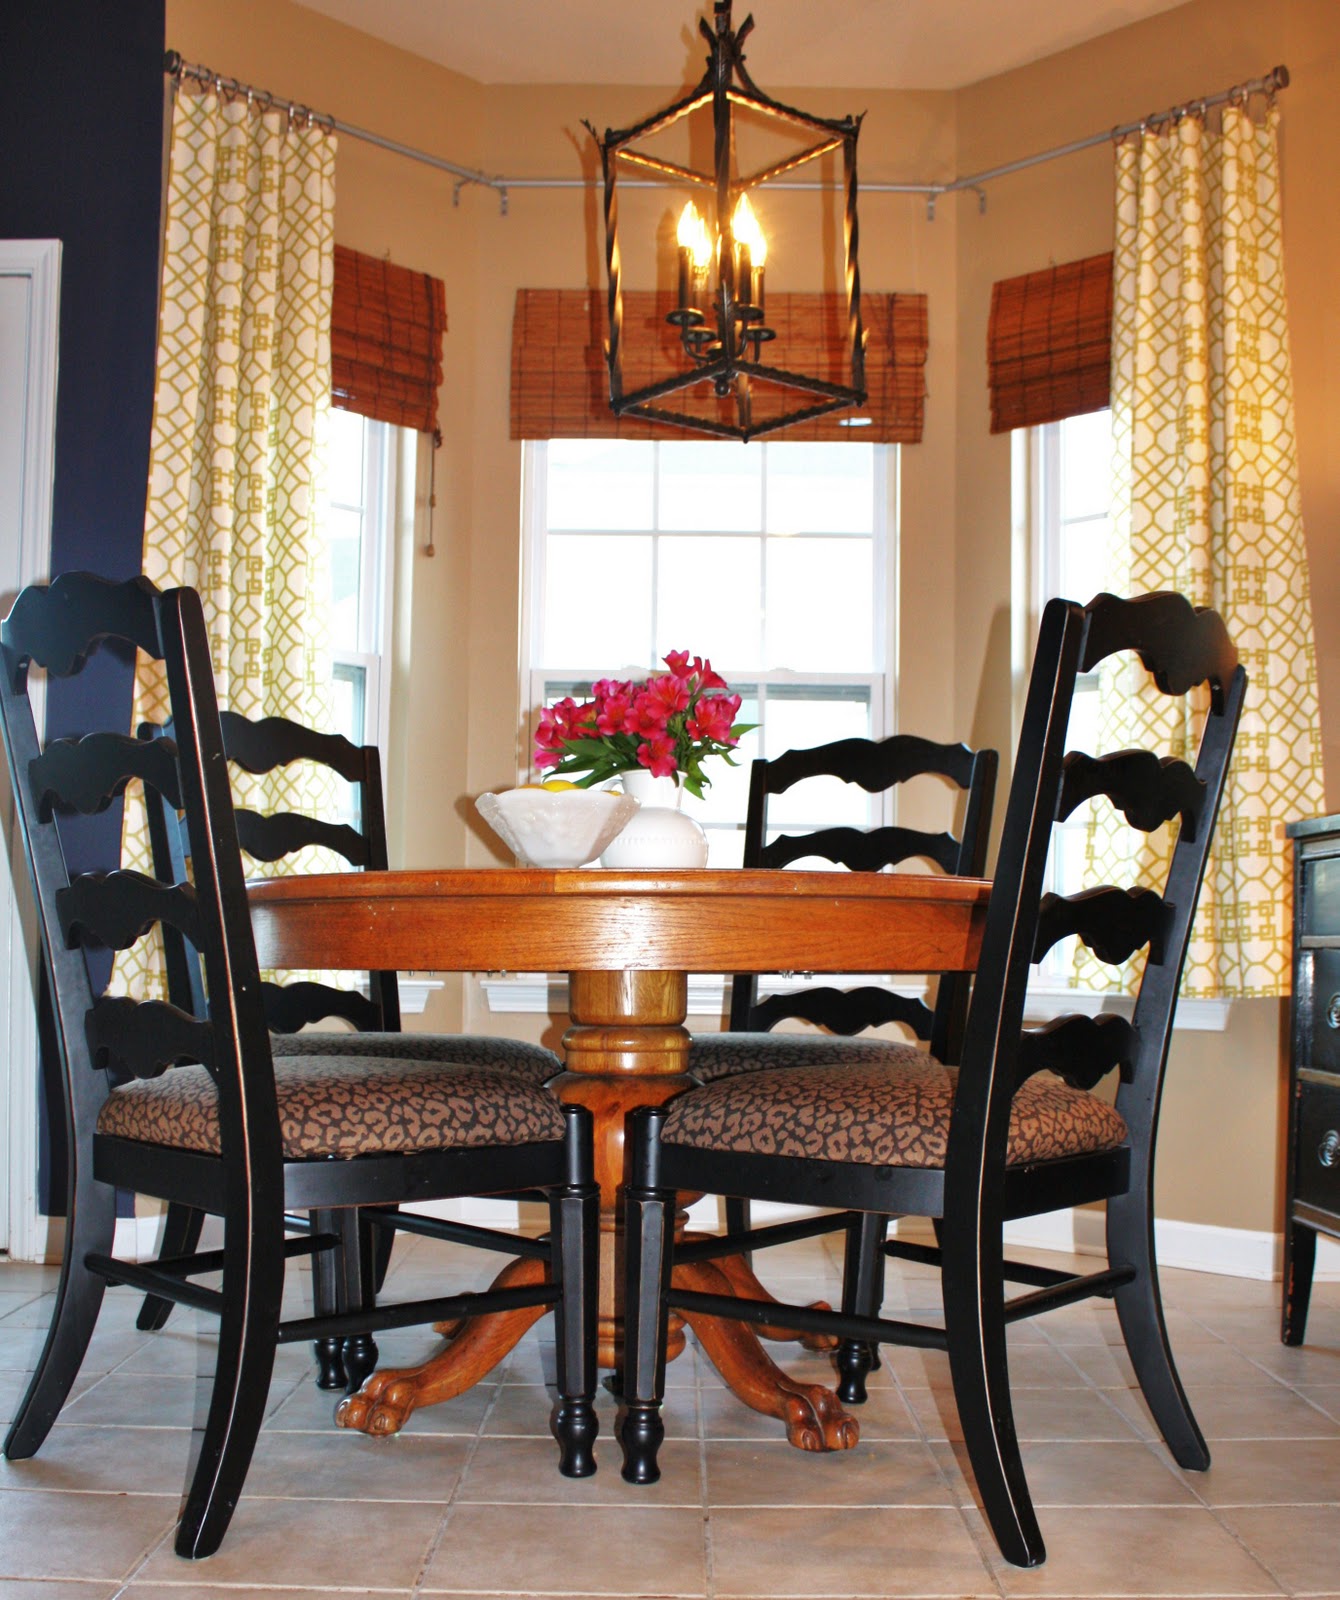 Hanging Curtains On Bay Windows 